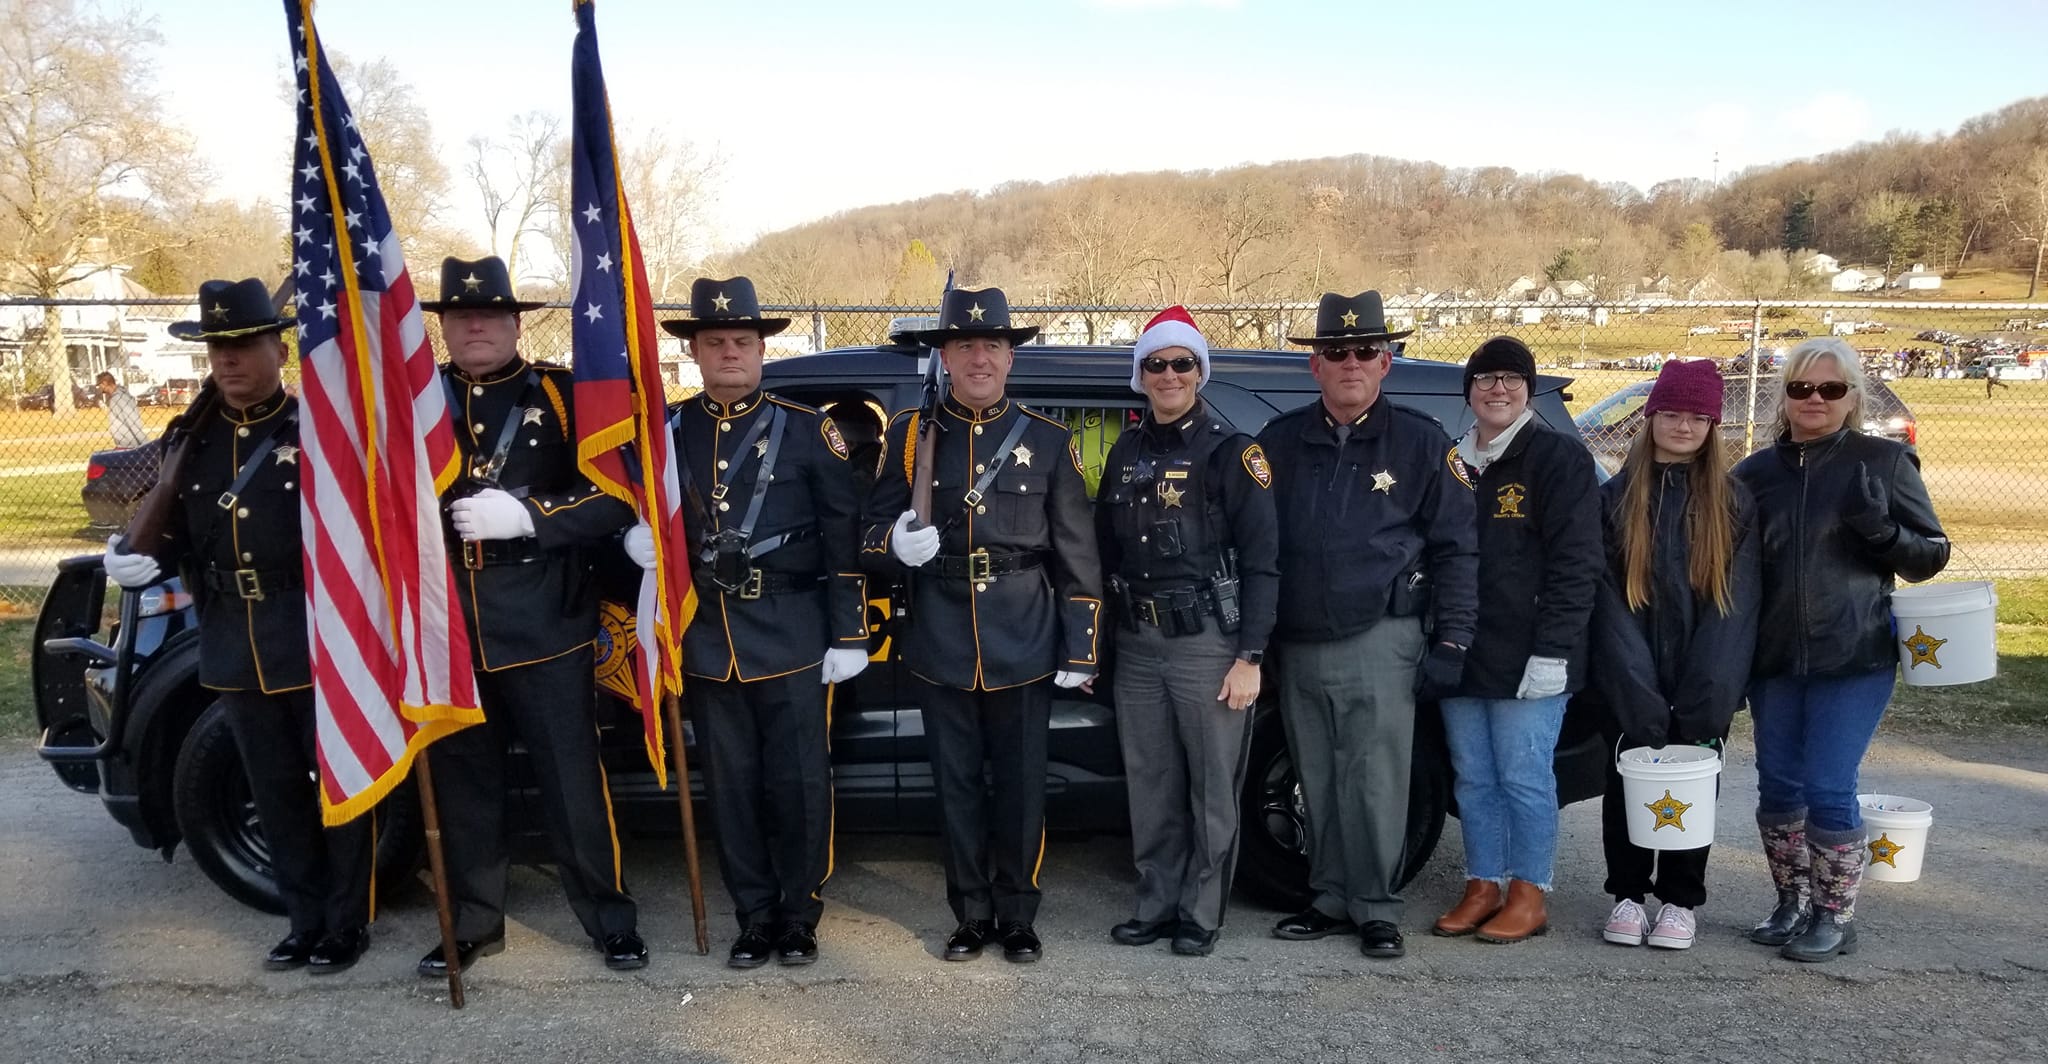 Group photo of sheriffs with American flag